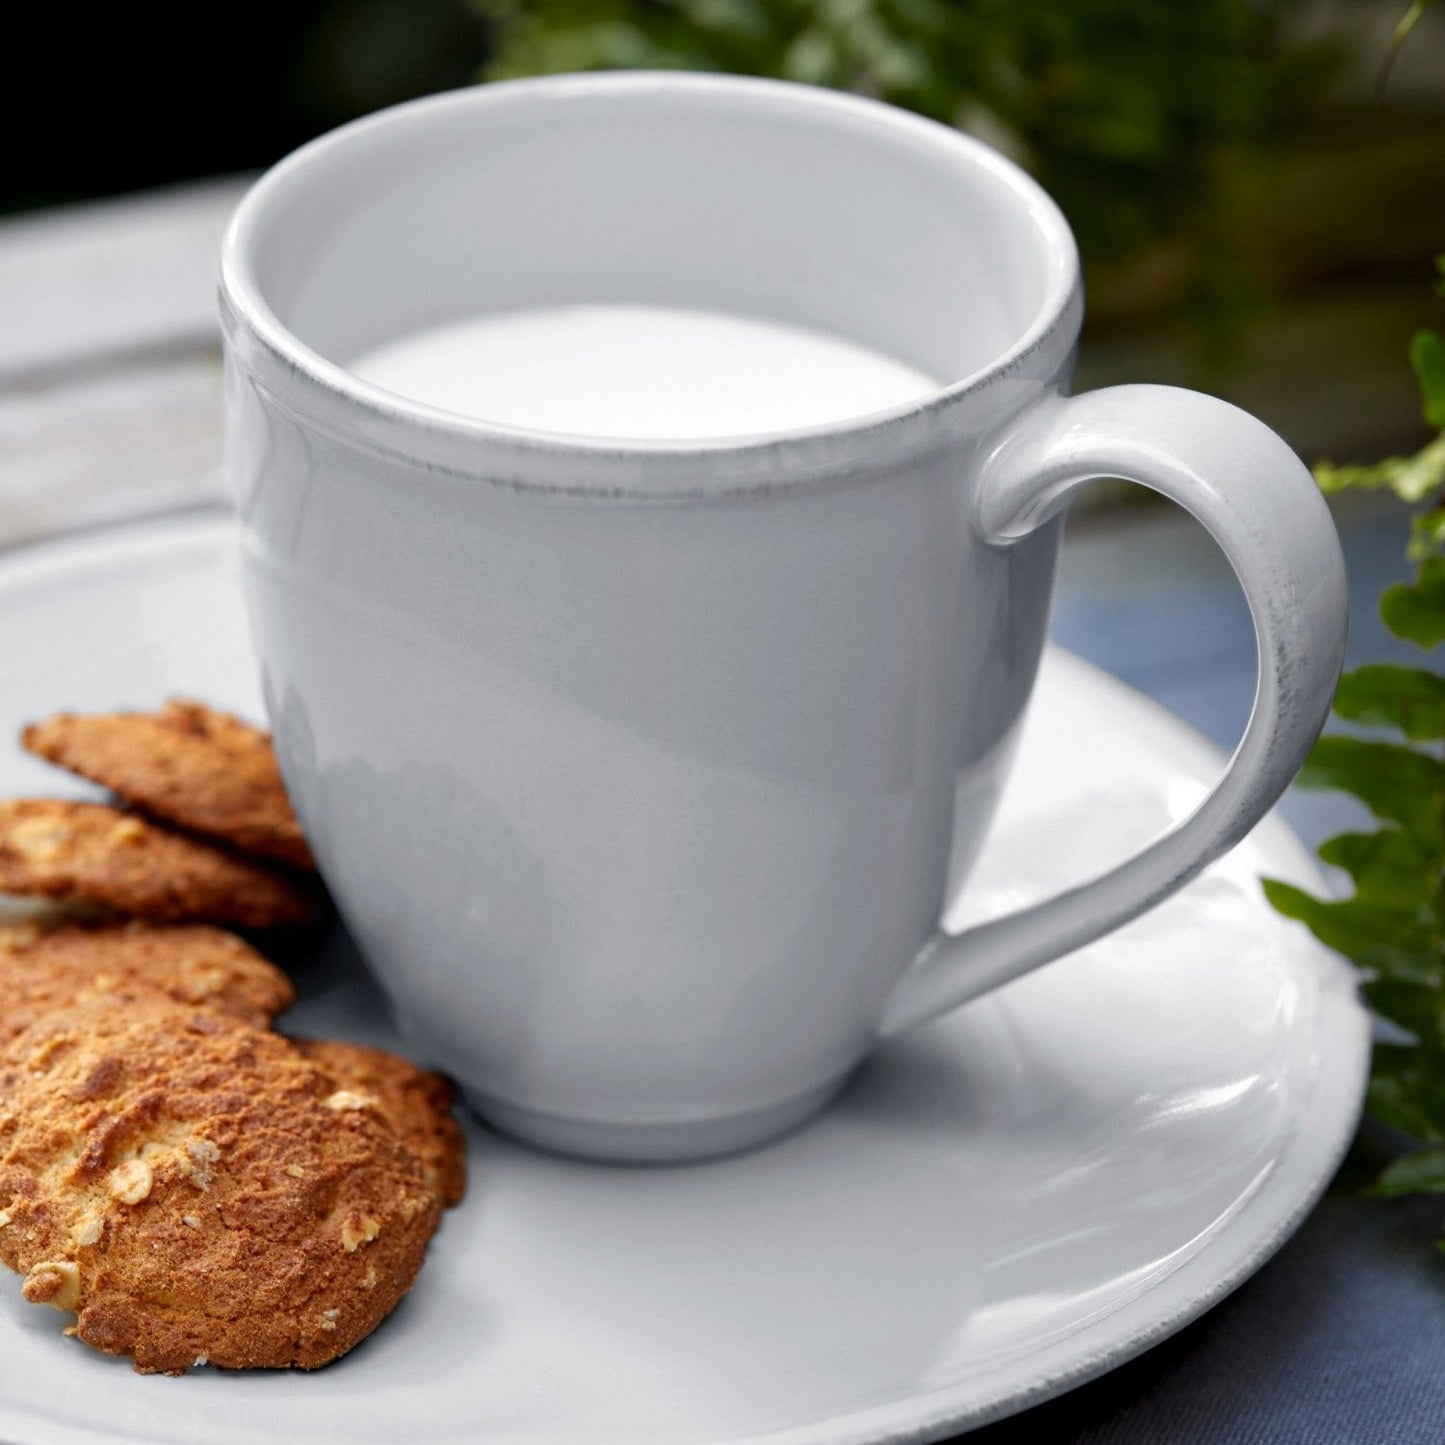 white mug filled with milk set on a white plate with cookies.